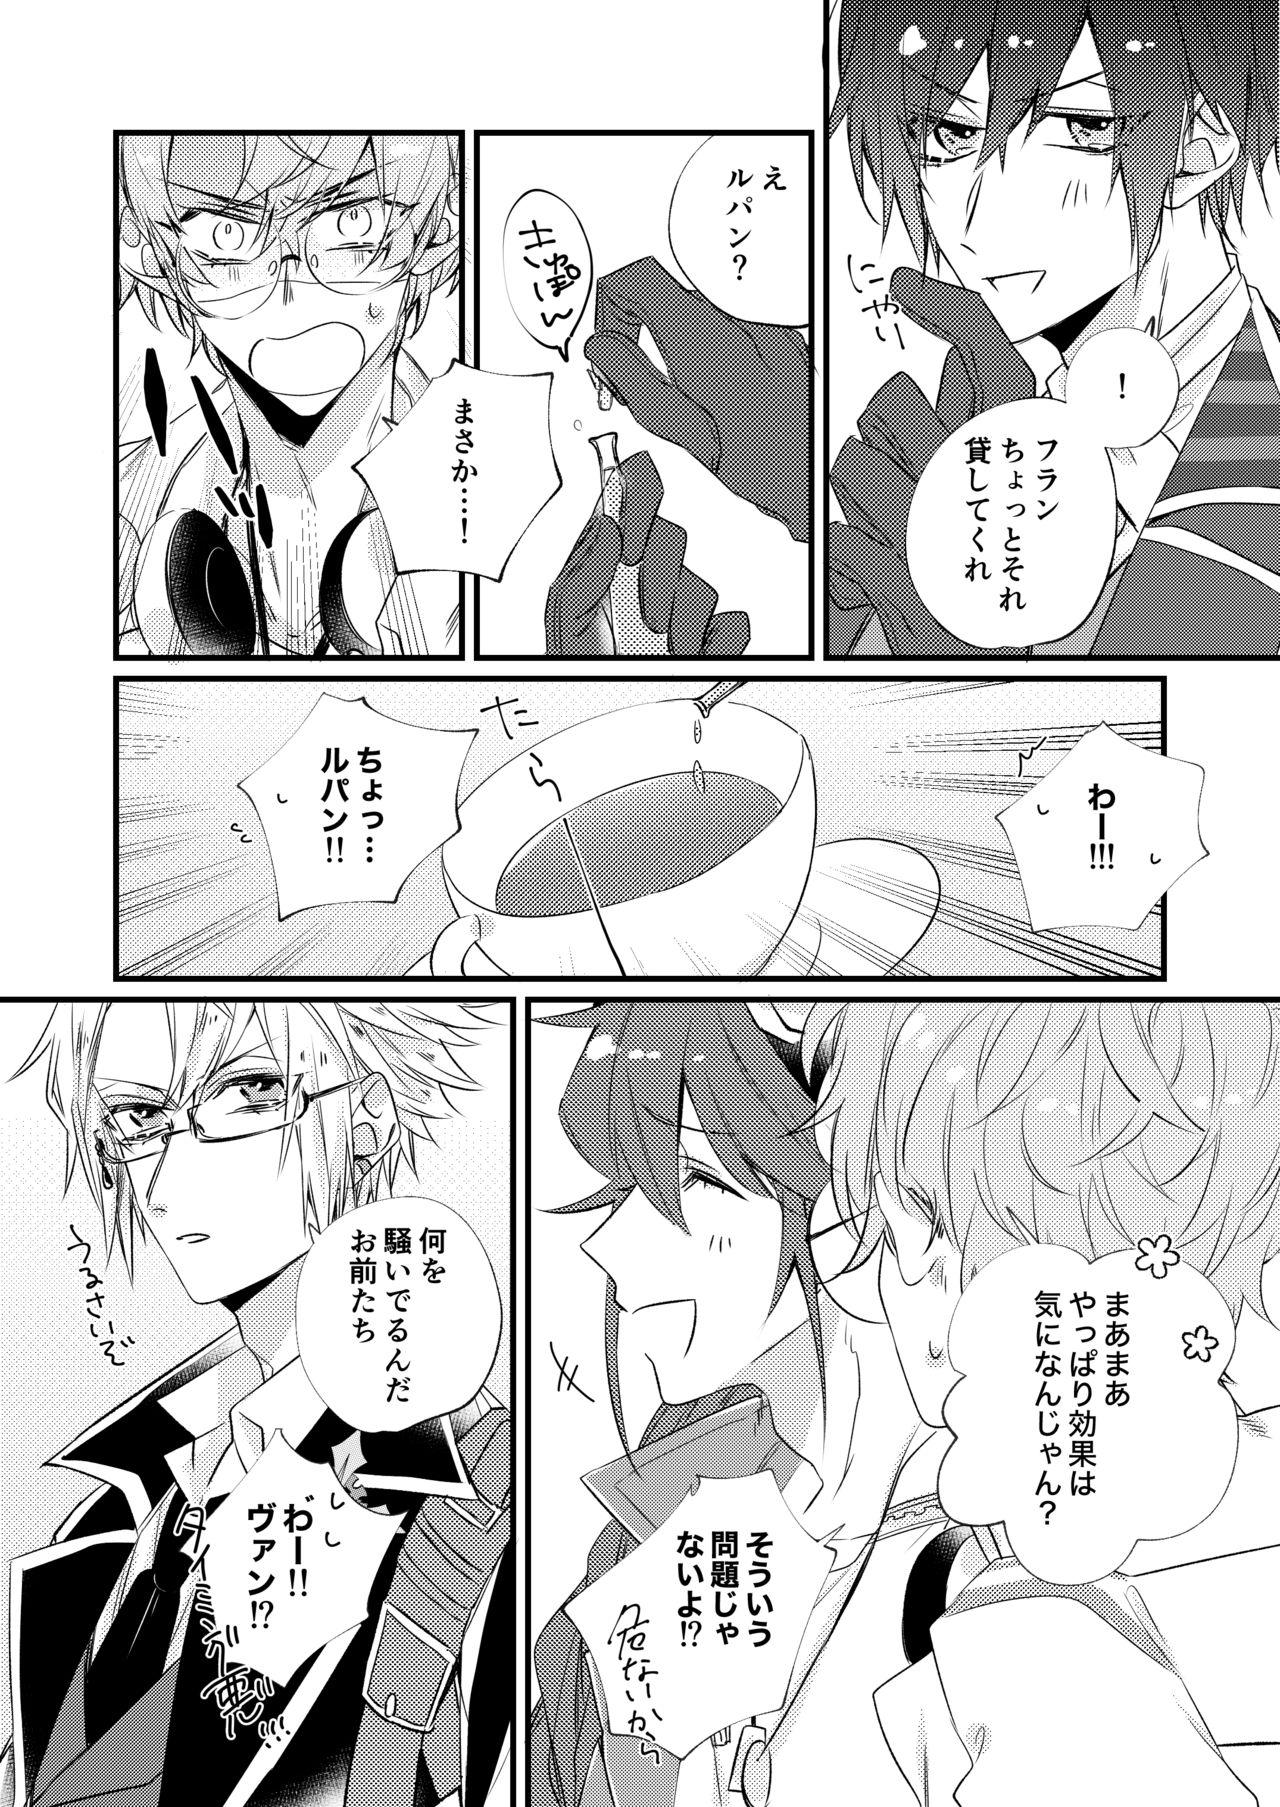 Delicia 熱におぼれる - Code realize sousei no himegimi Hogtied - Page 5